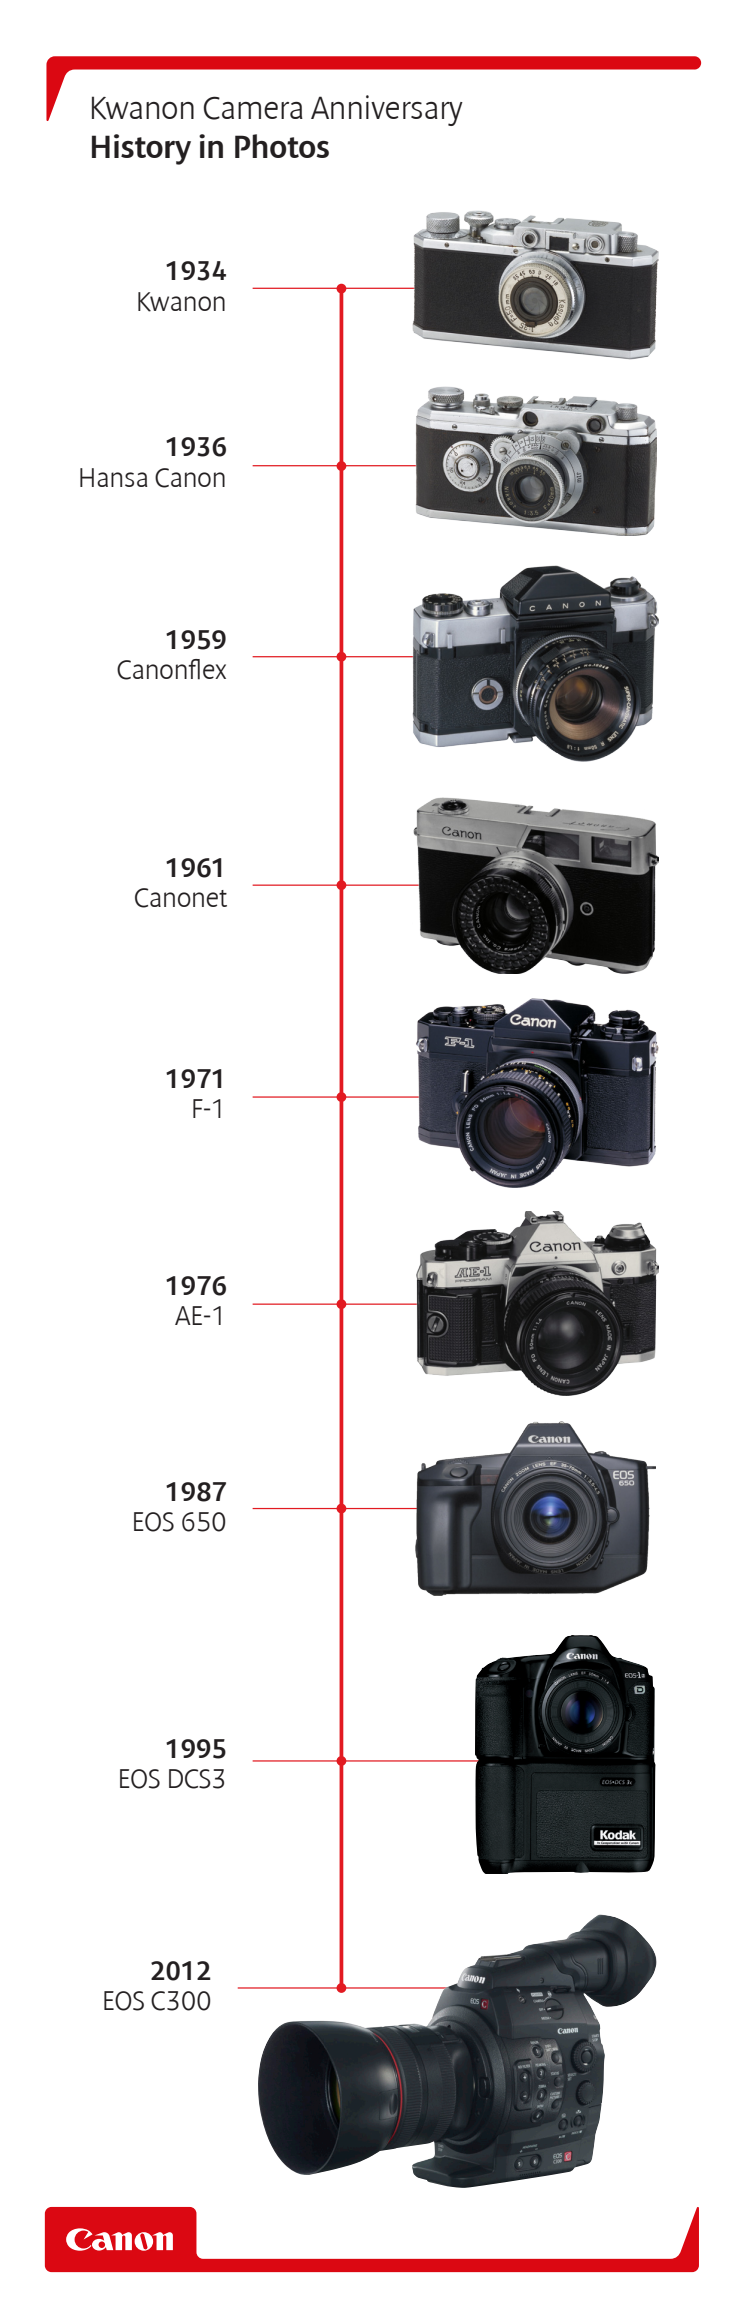 Canon Kwanon anniversary - history in pictures vertical timeline